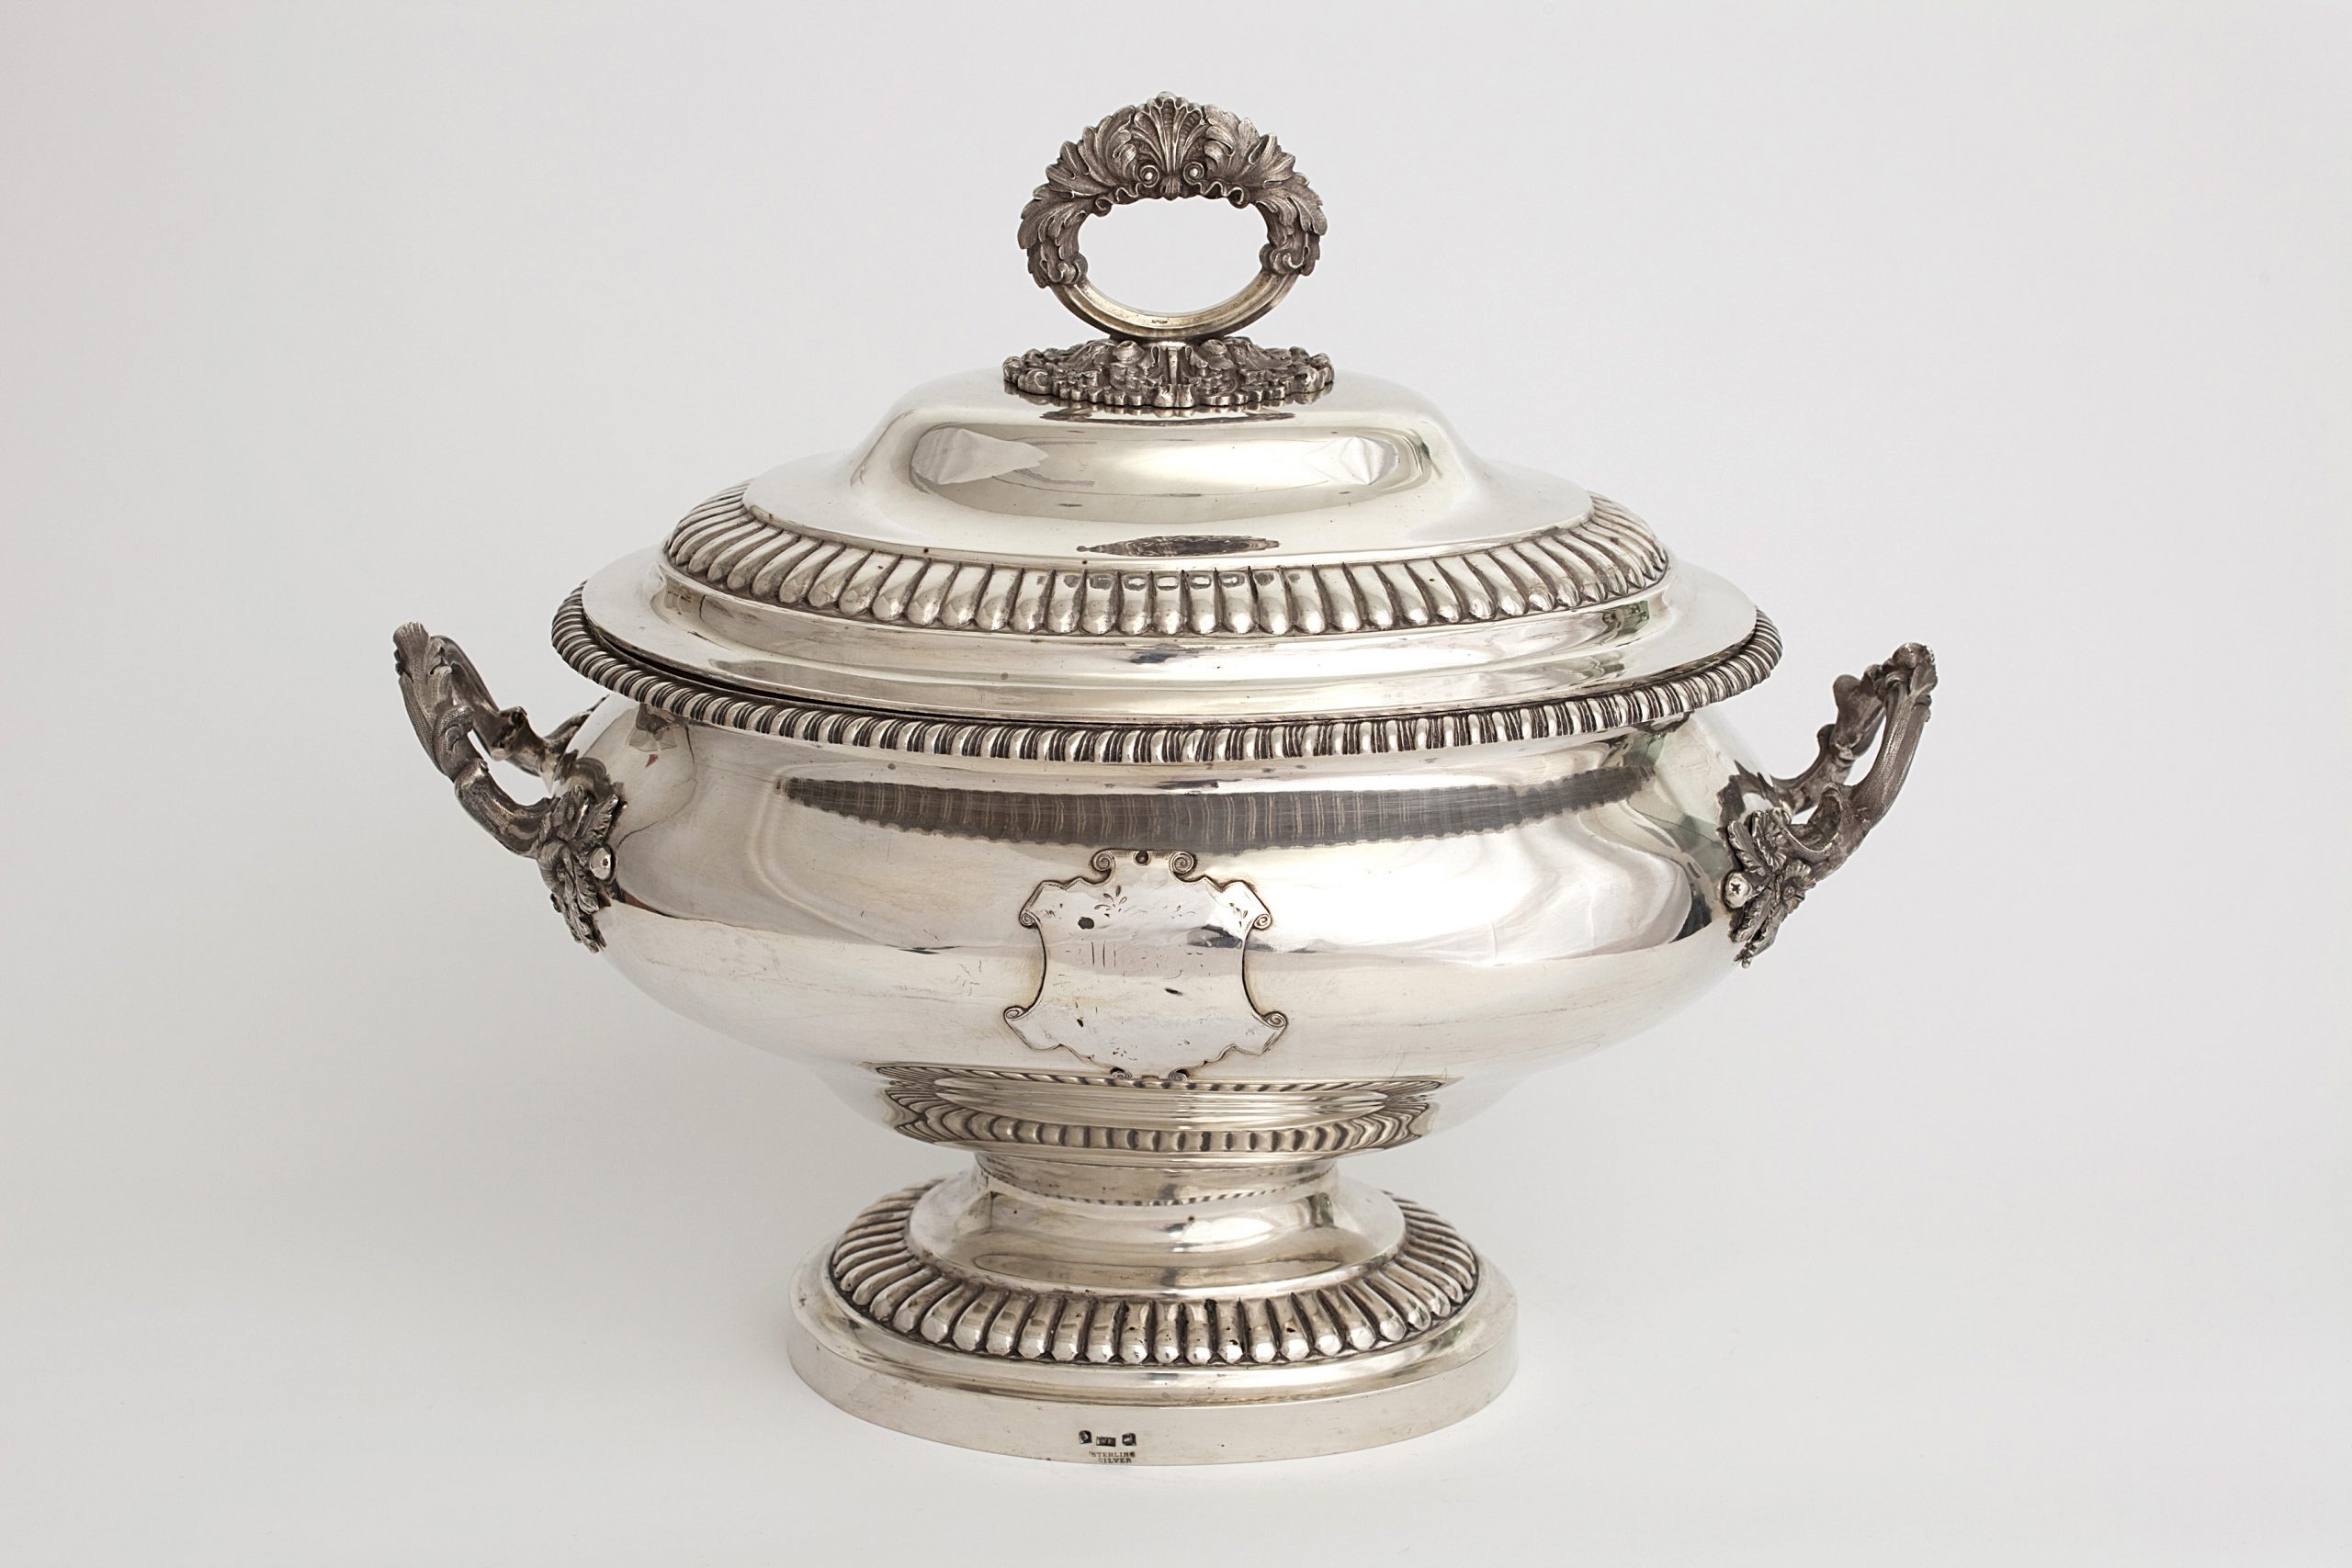 Ornate silver soup tureen embellished with petal shapes, scrolls, and floral fittings